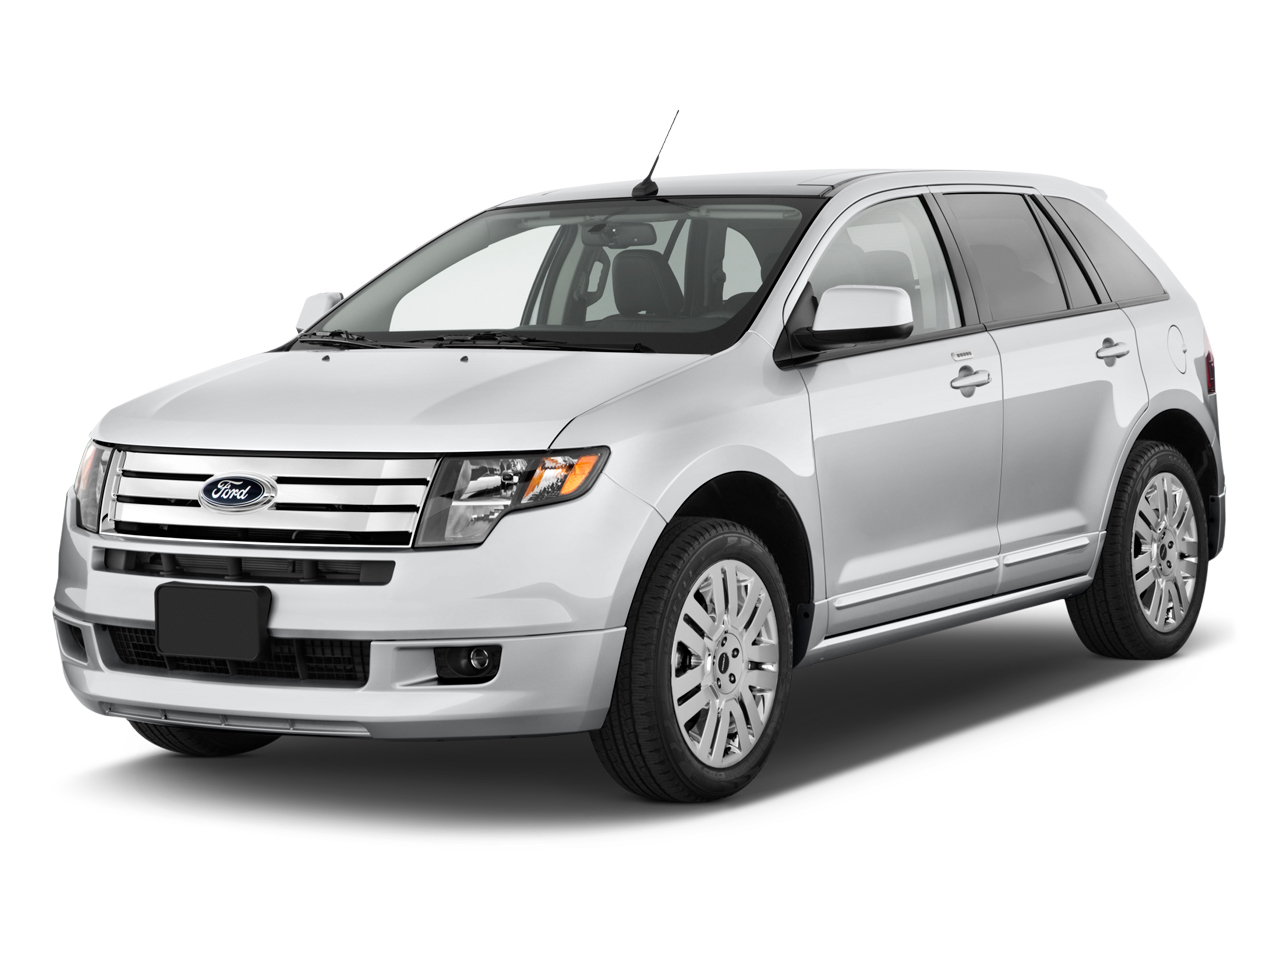 2011 Ford Edge Review Ratings Specs Prices And Photos The